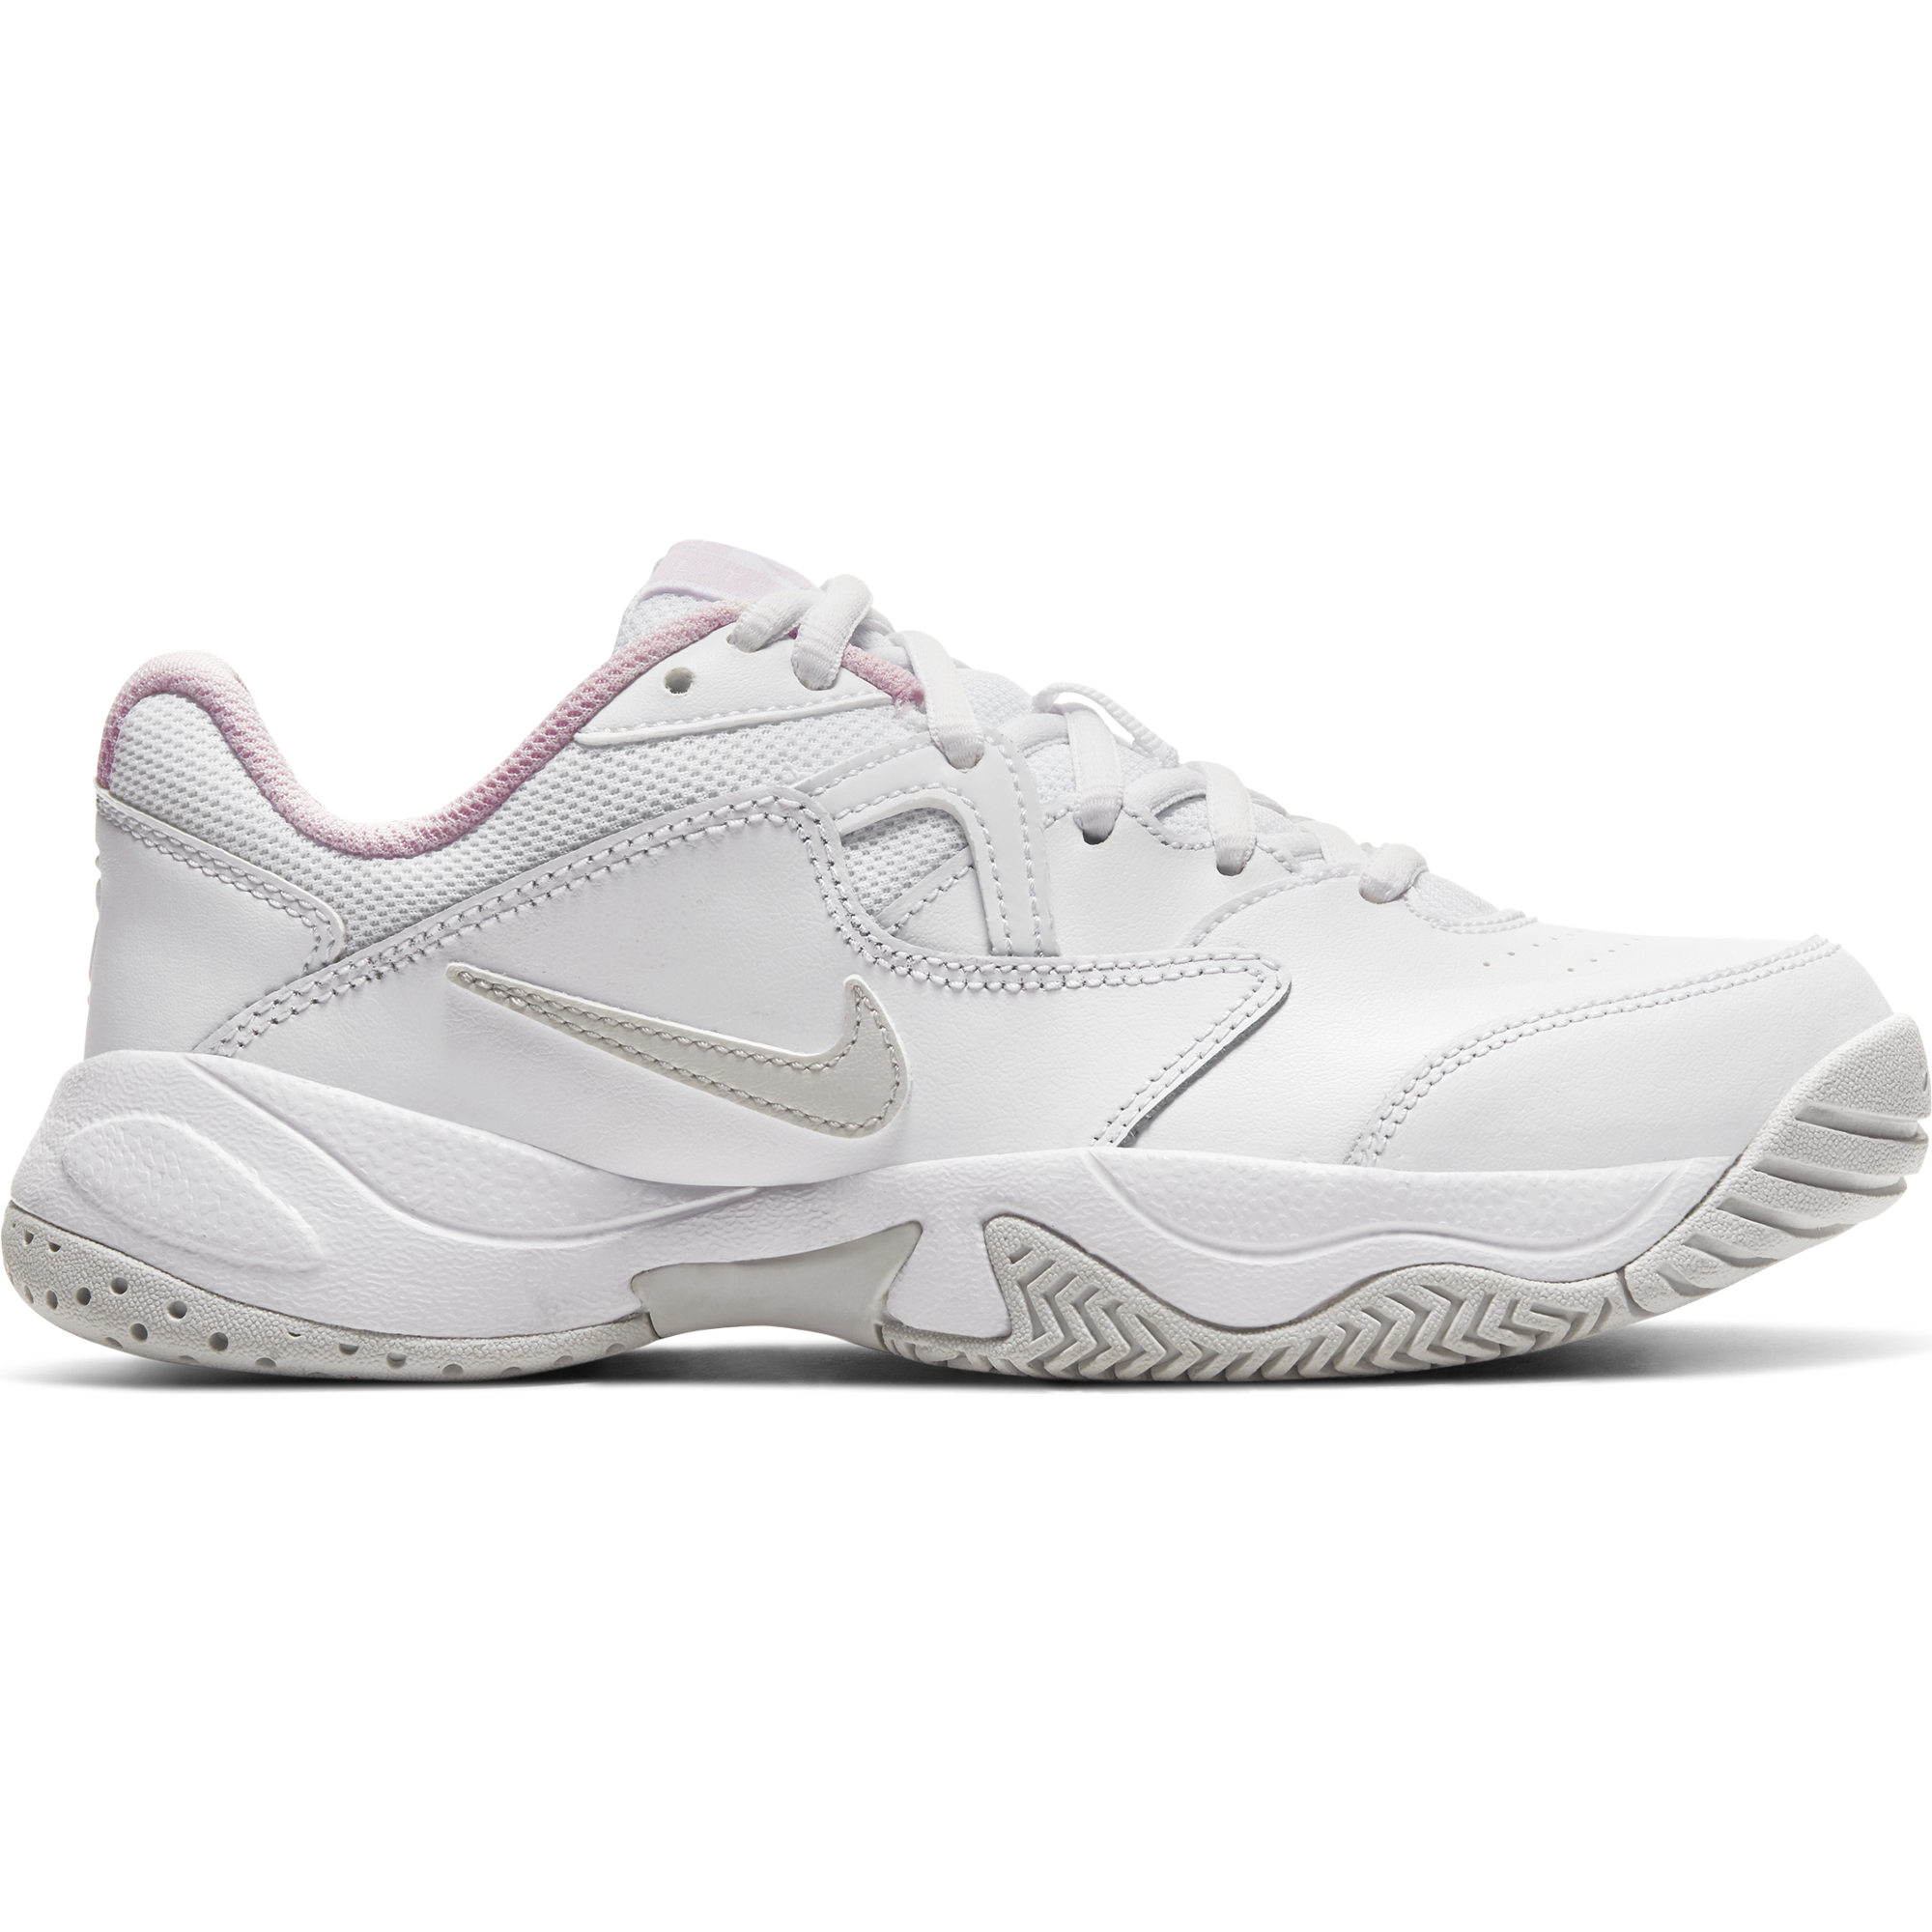 white youth tennis shoes